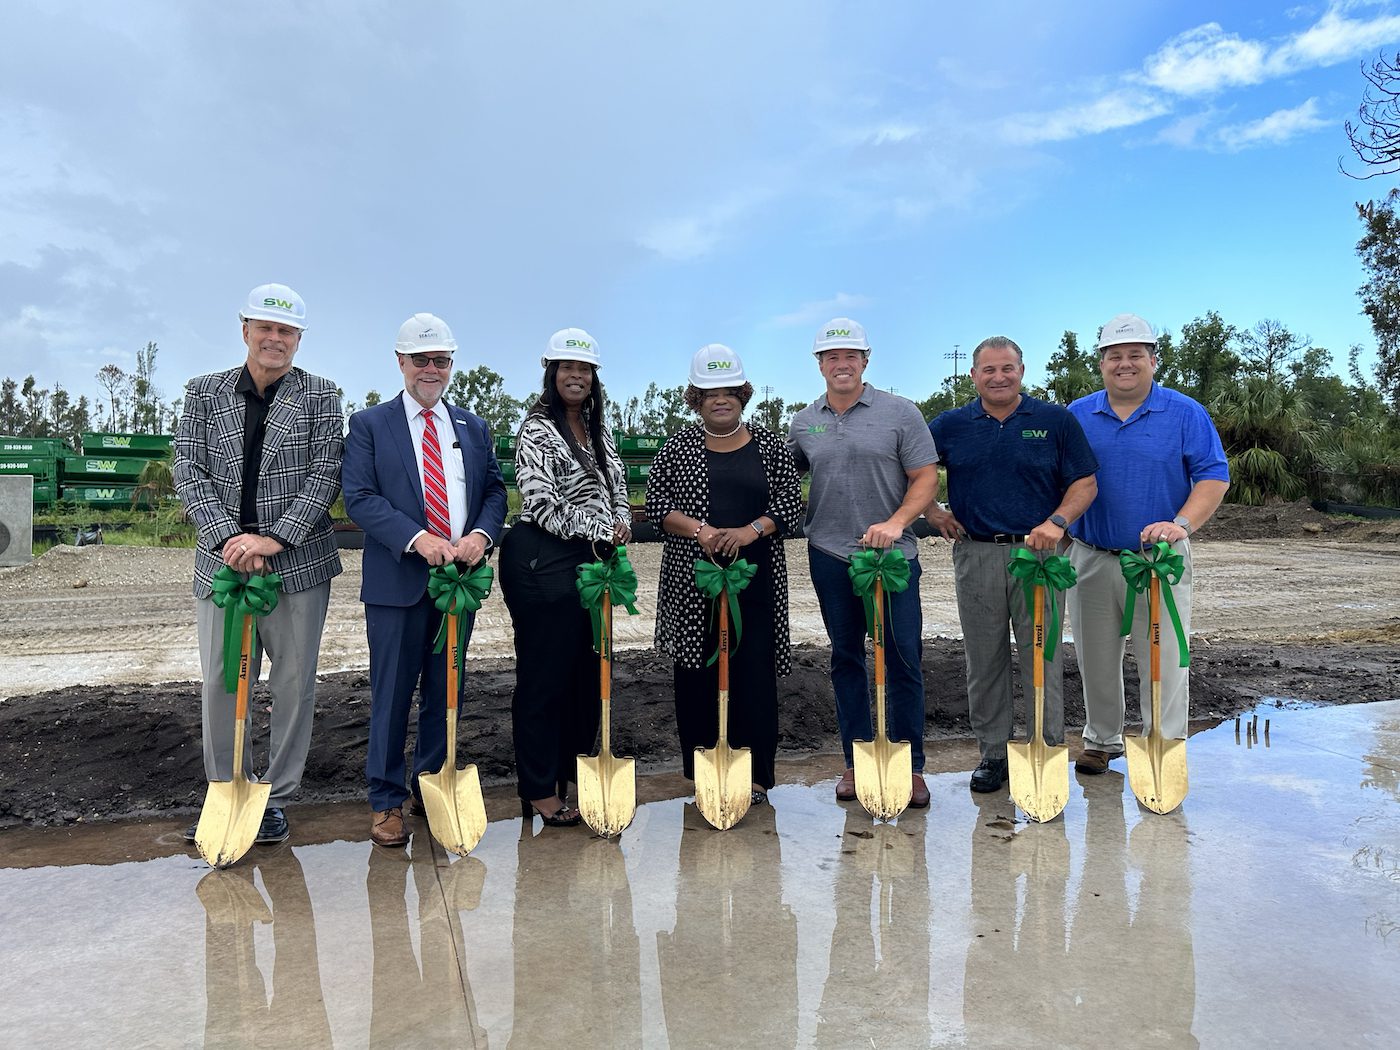 Seagate Development Group Announces Official Groundbreaking Of Multi-Acre Site For Southwest Waste Services